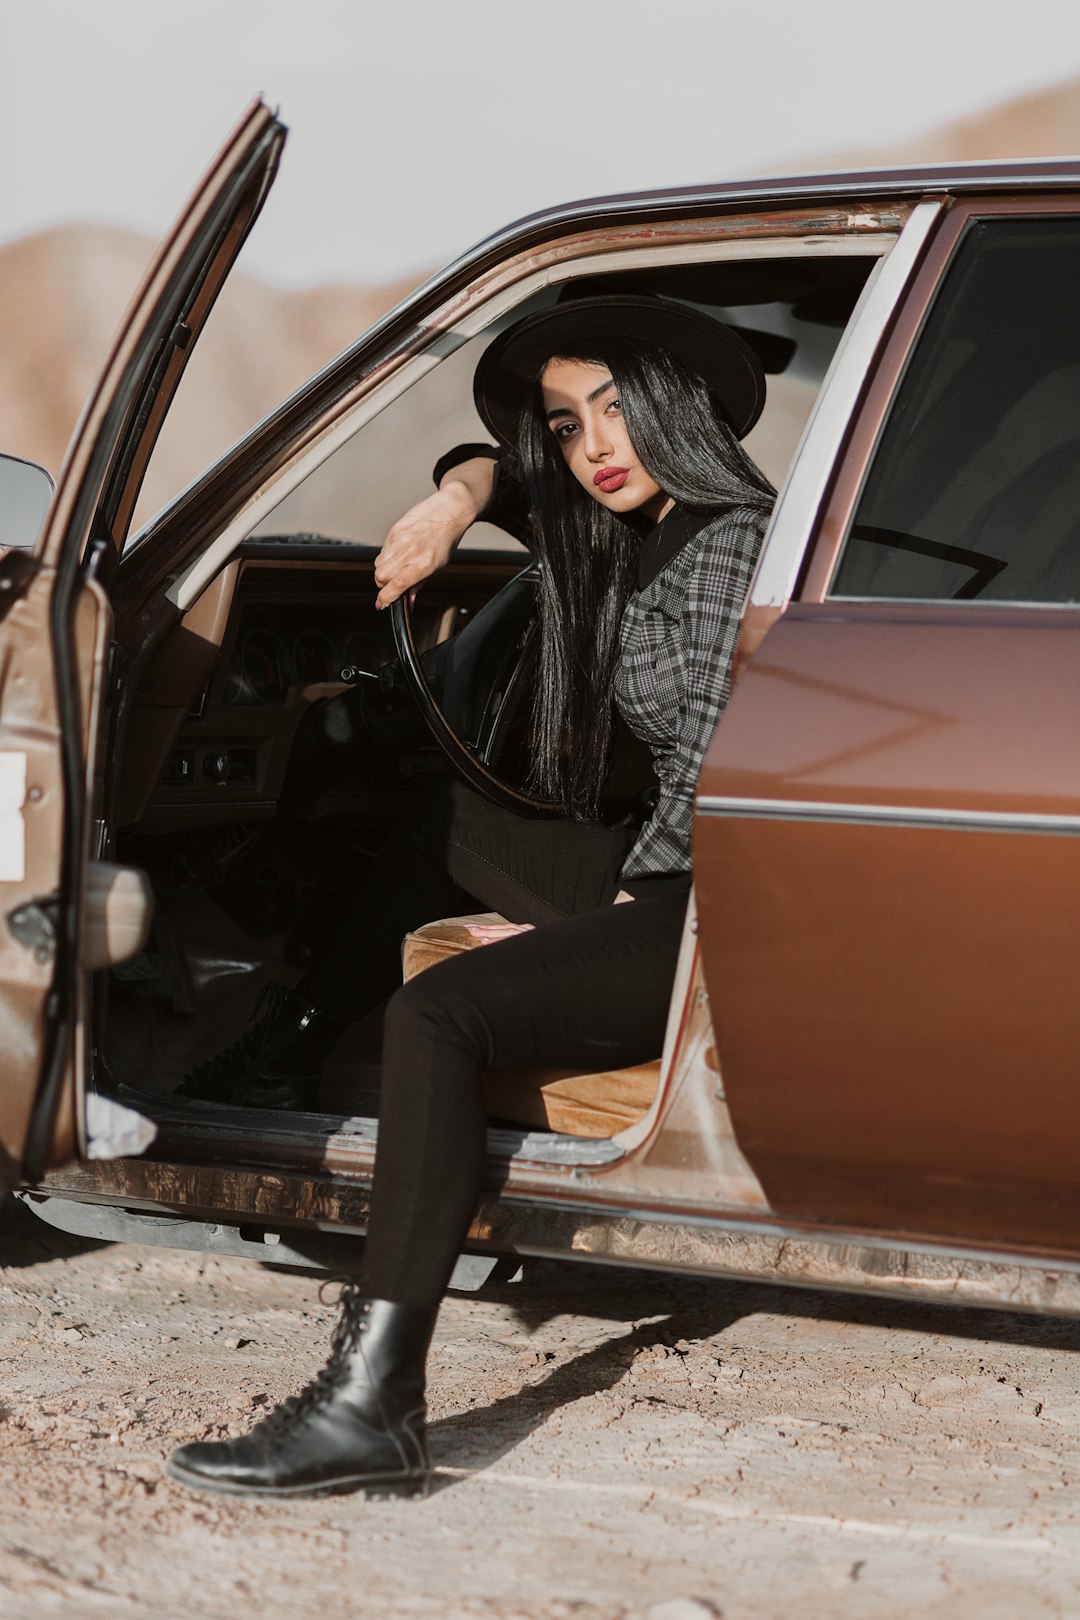 woman in black leather jacket and black pants sitting on car door during daytime